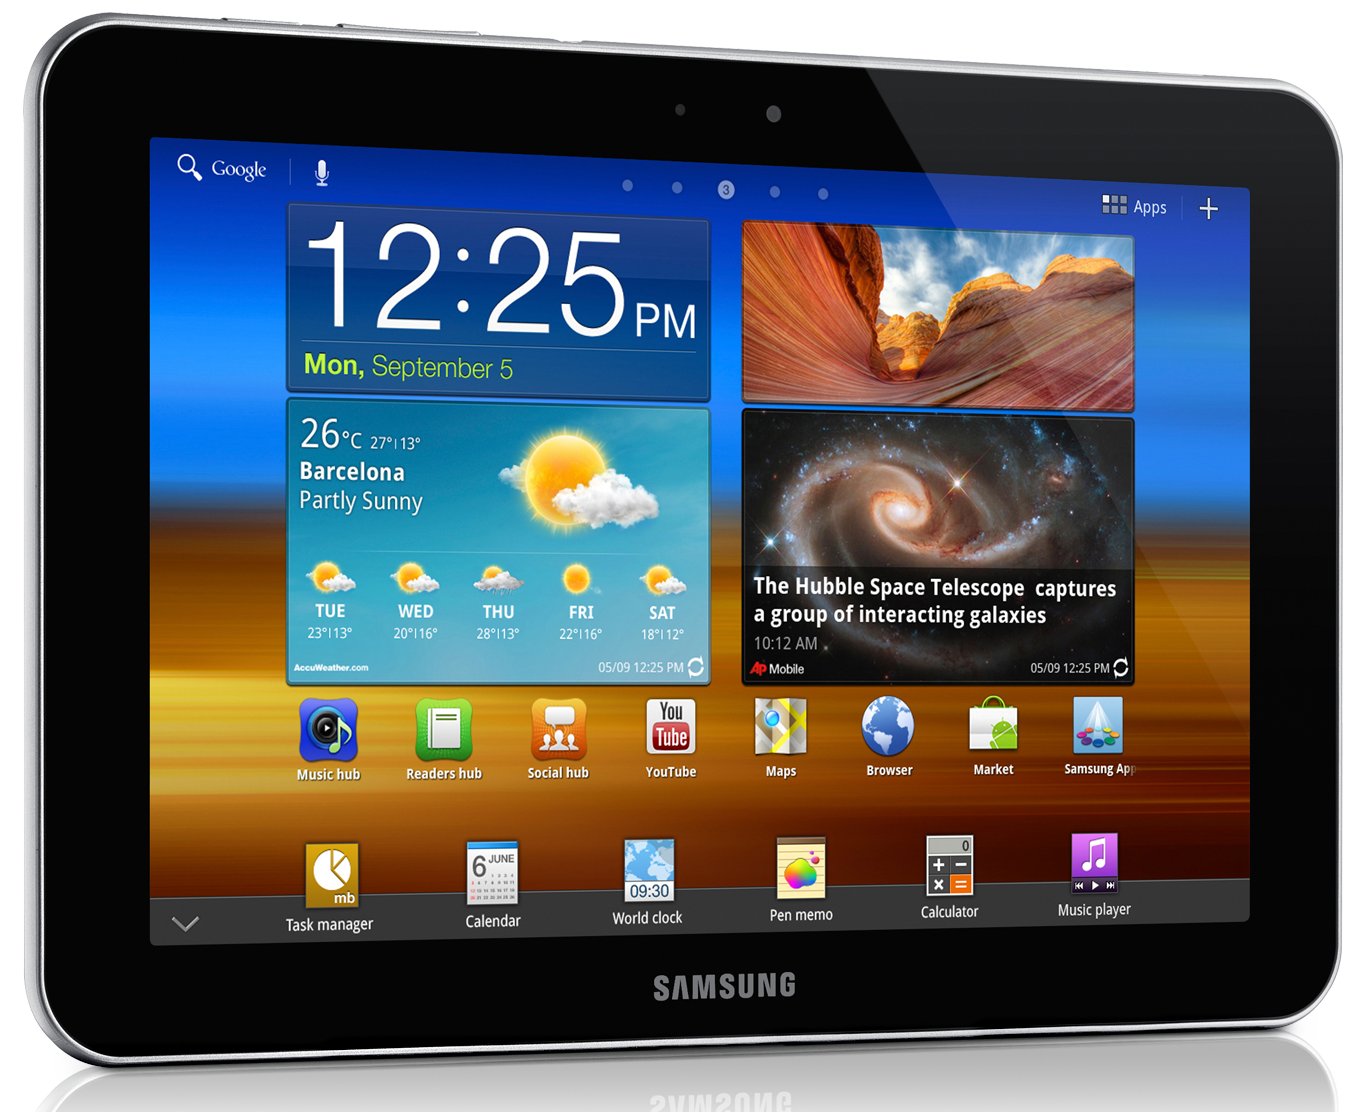 Samsung Galaxy Tablet Google image from http://images.samsung.com/is/image/samsung/sg_GT-P7300UWAXSP_002_Left-Angle?$Download-Source$